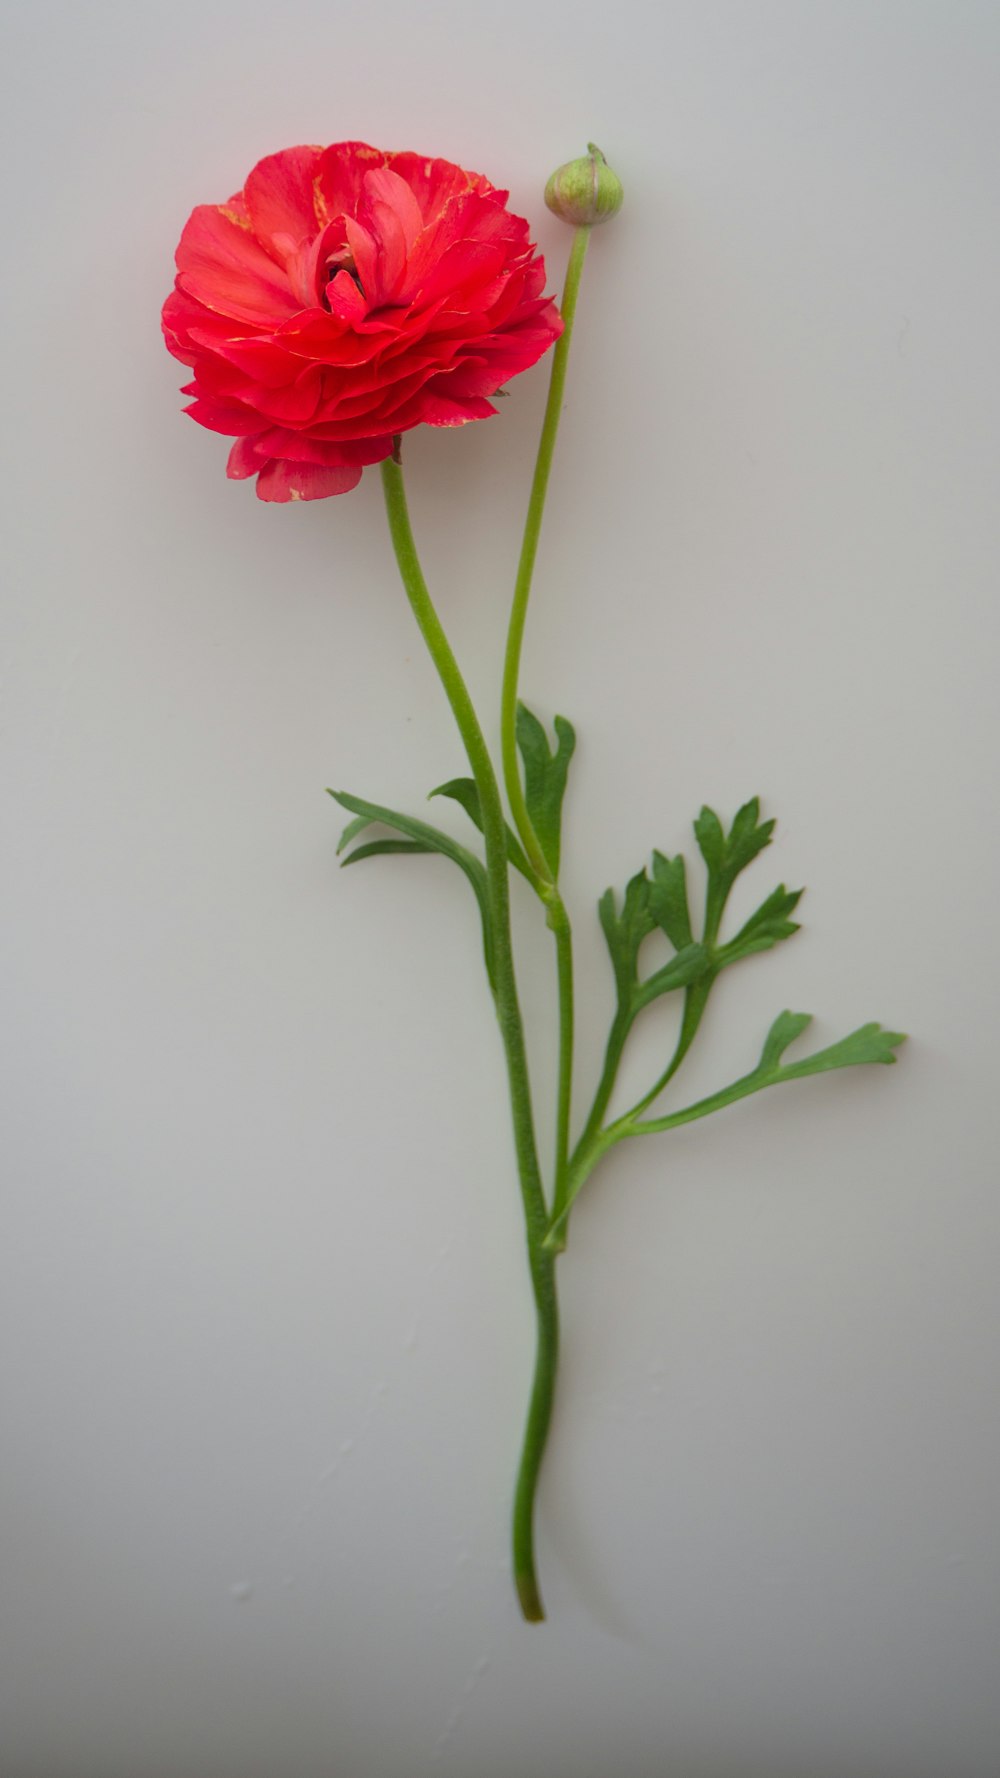 red flower on white surface